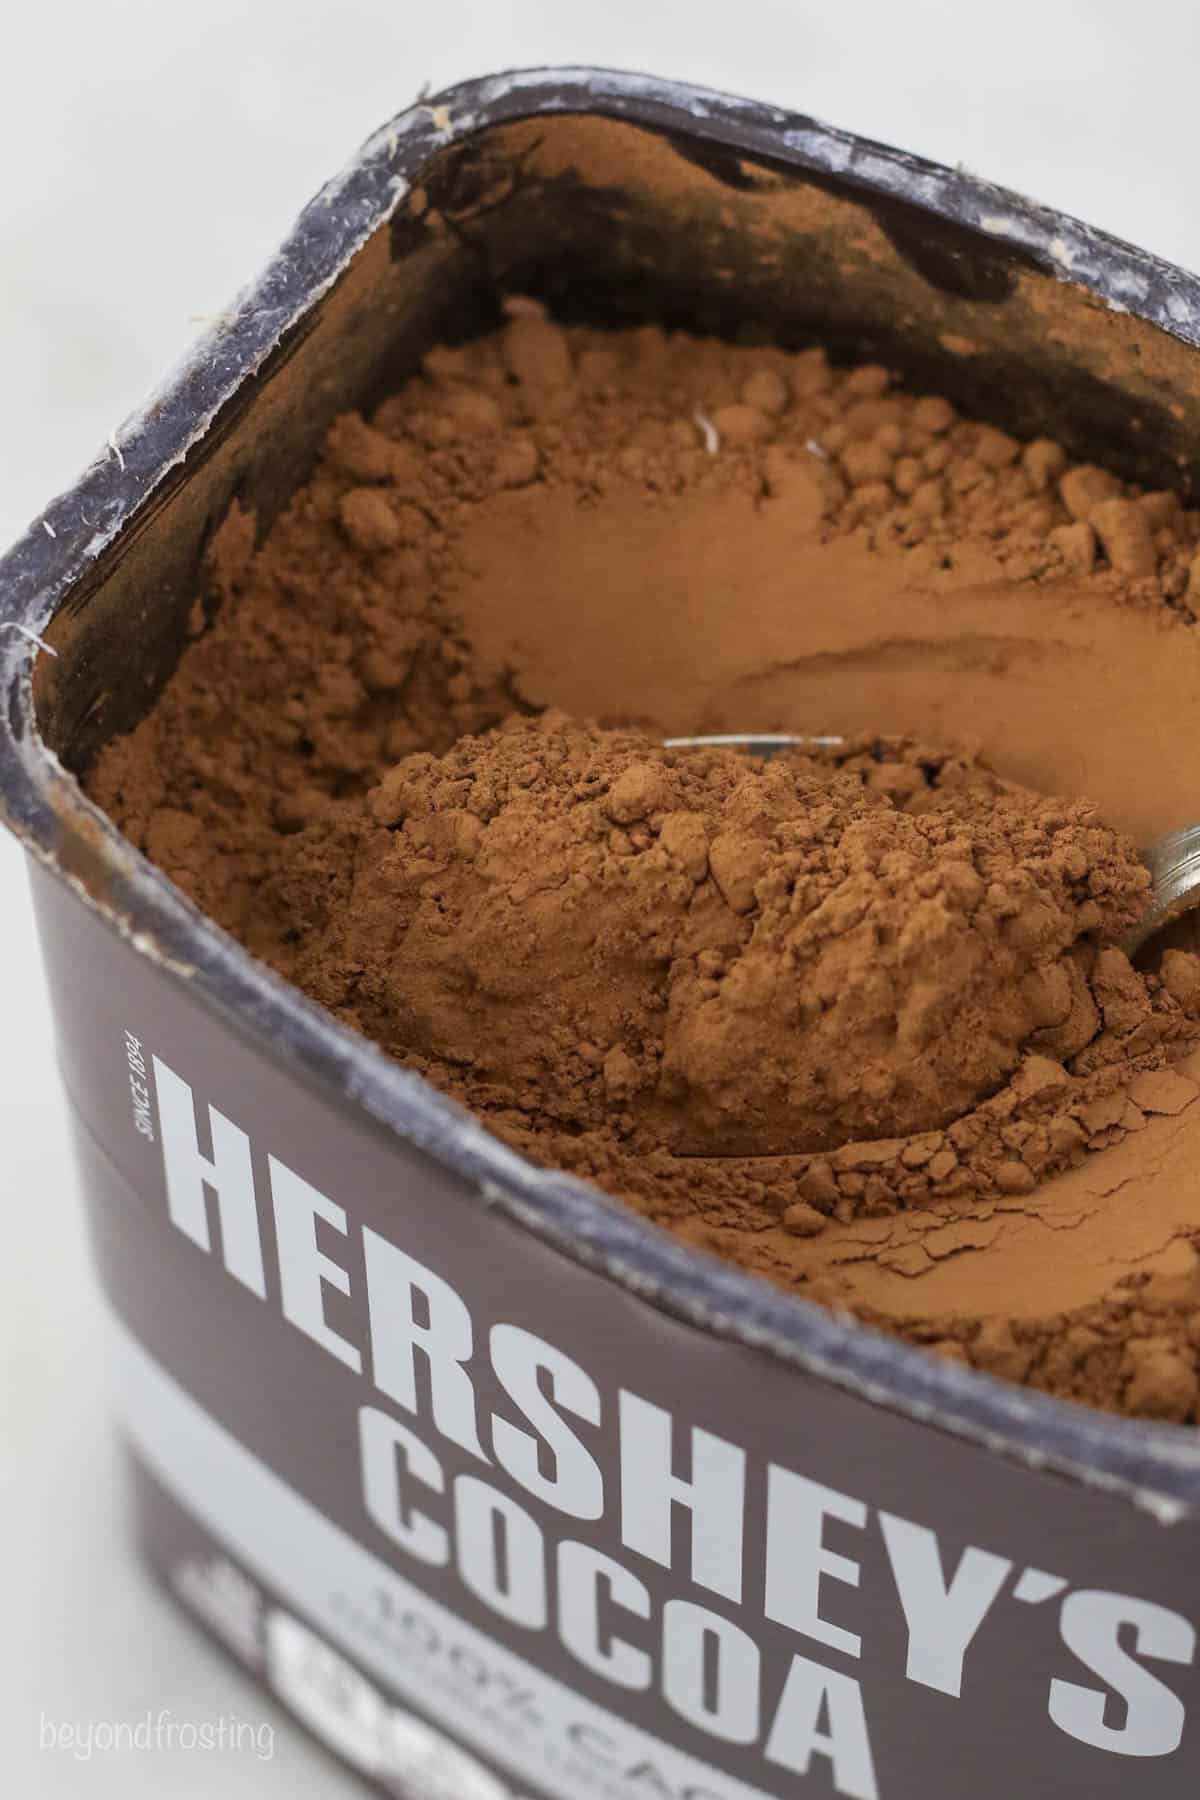 an open jar of Hershey's Cocoa powder with a spoon in it